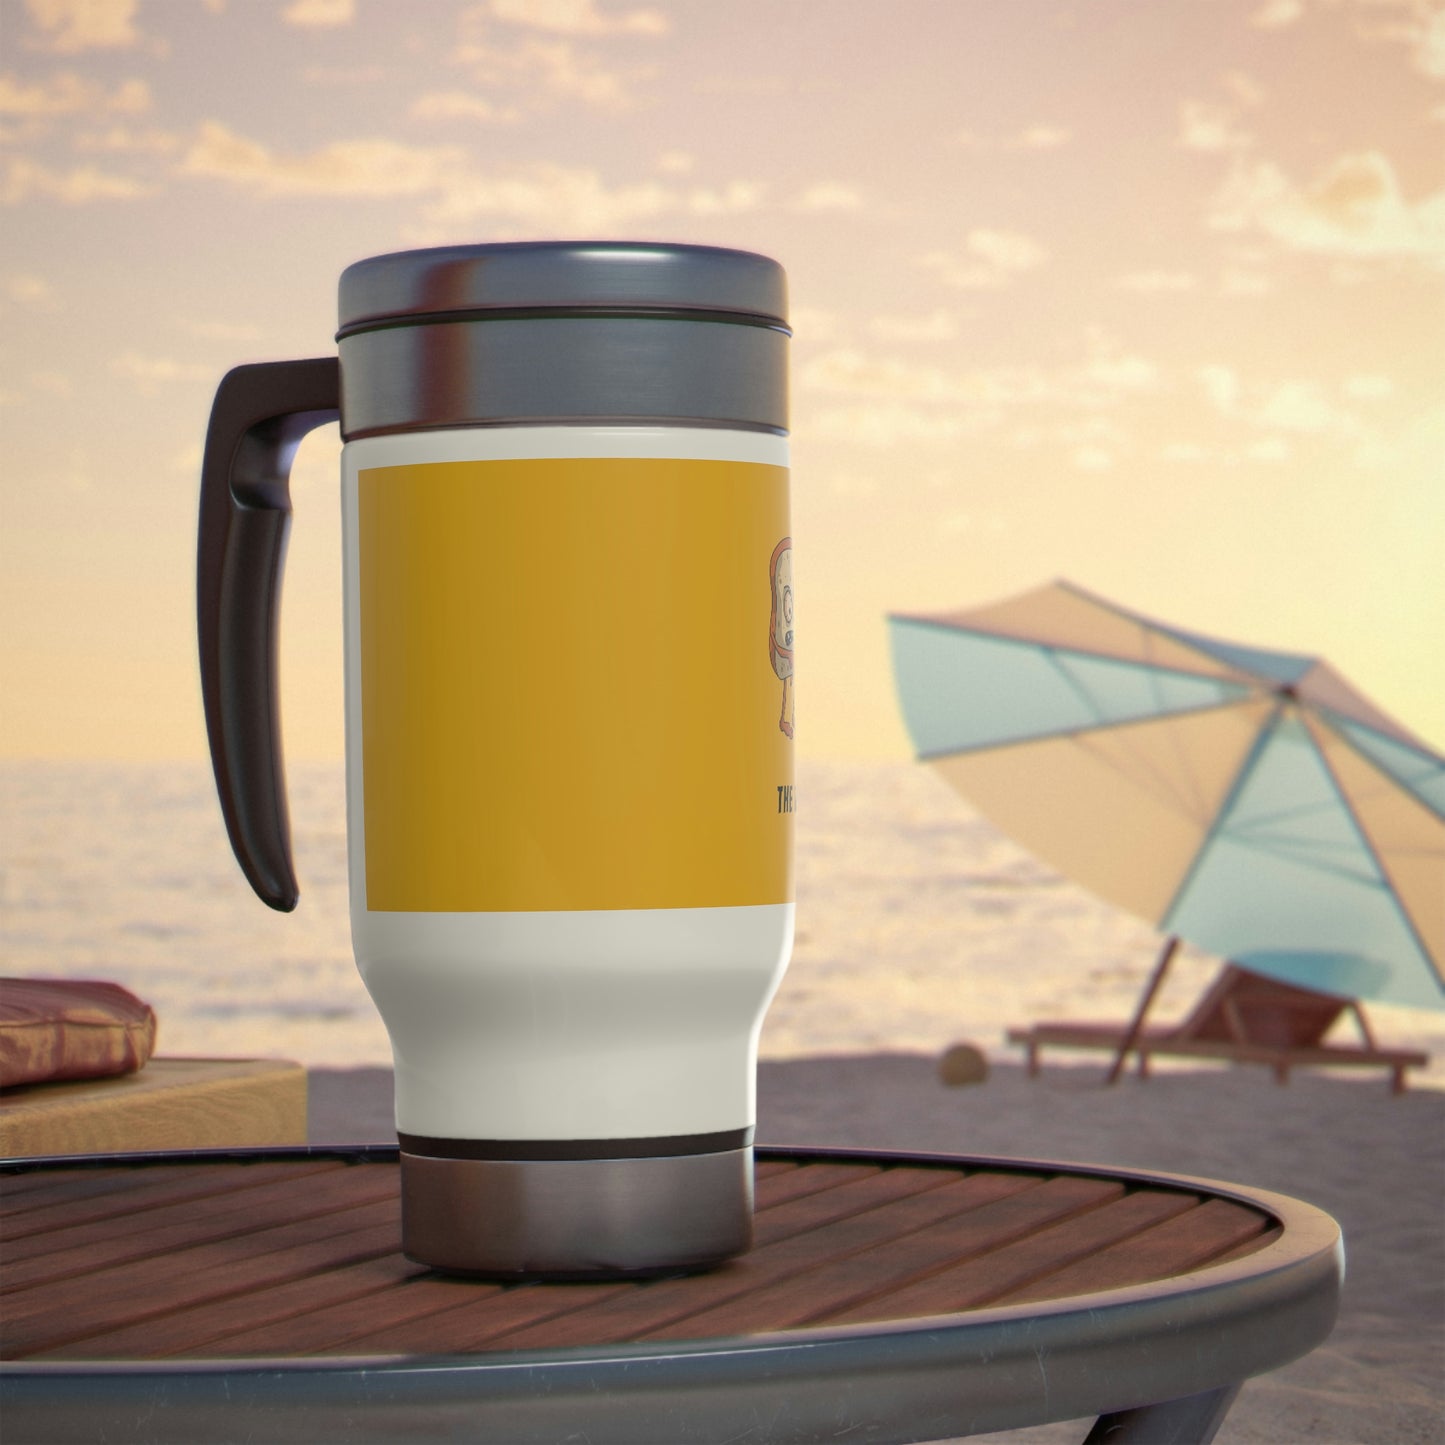 The Walking Bread- Stainless Steel Travel Mug with Handle